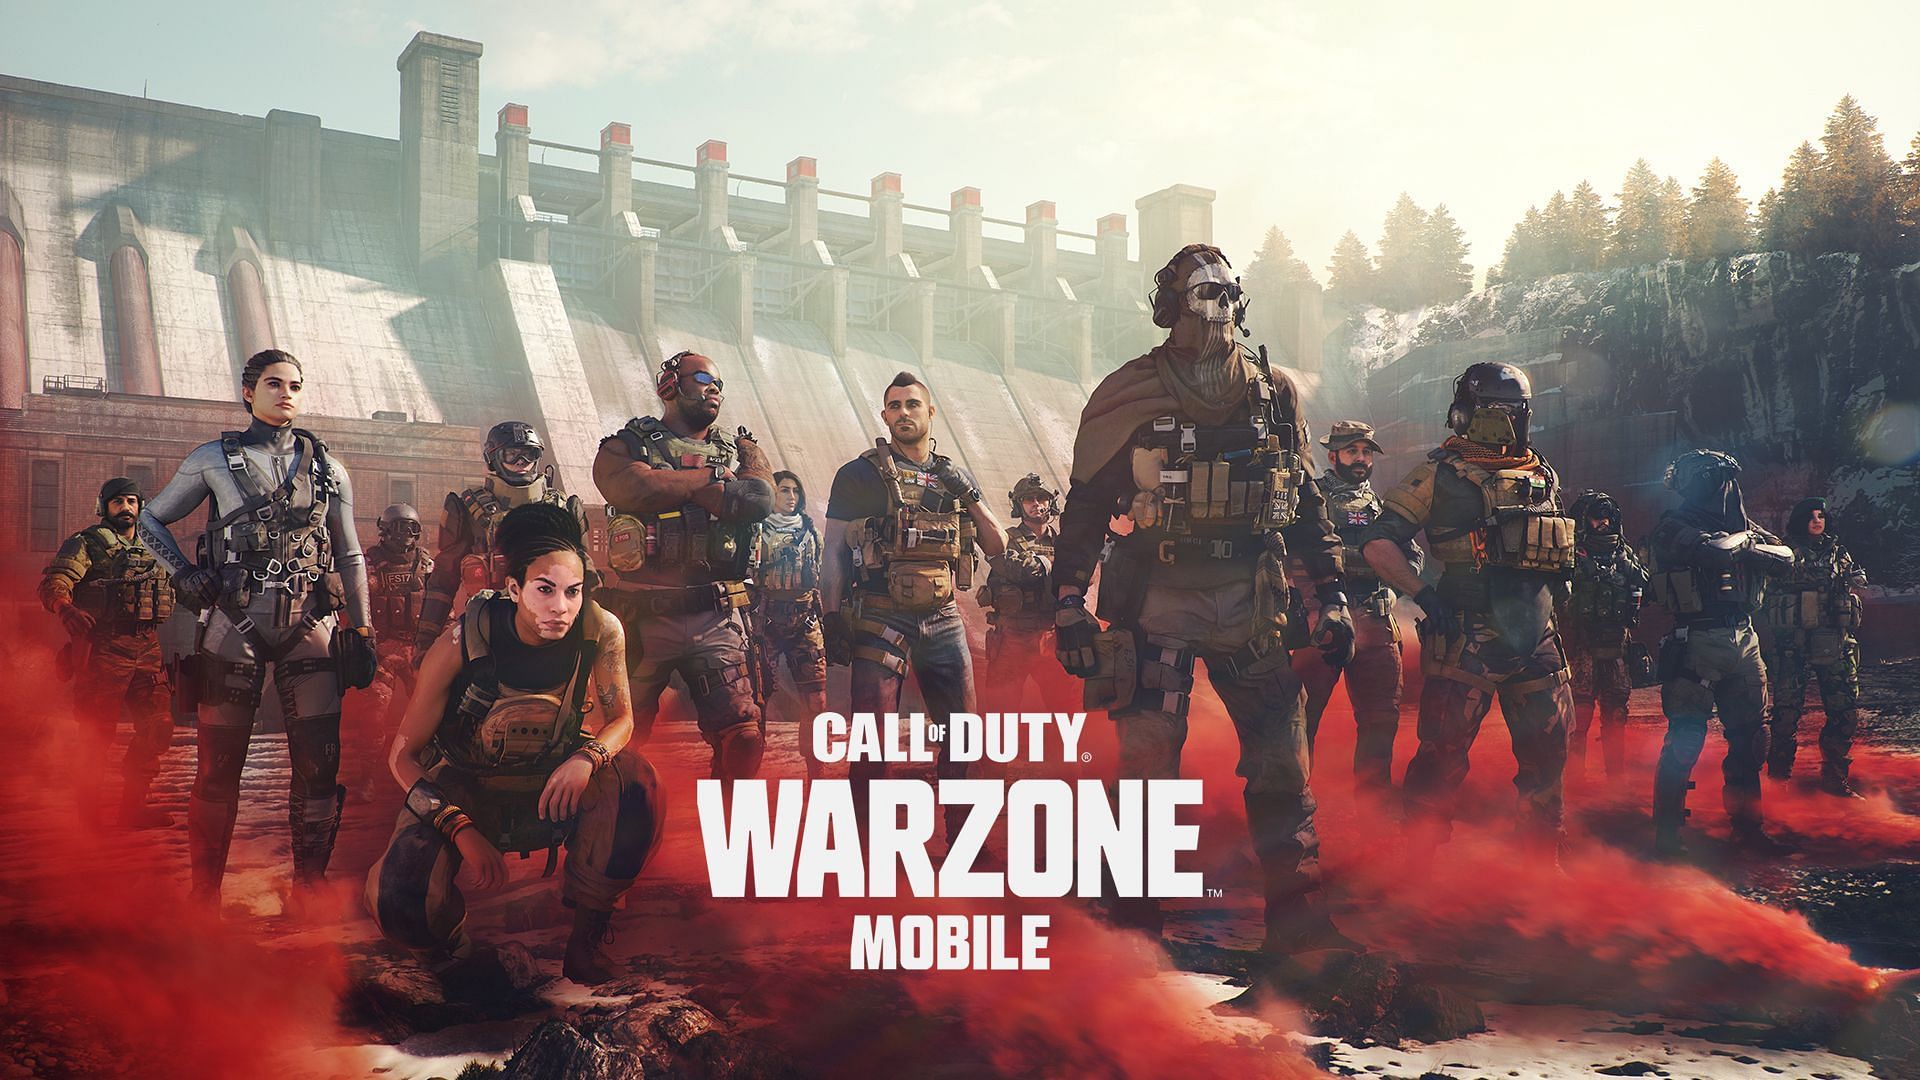 COD Warzone Mobile's Limited Release is now available in Australia, Chile,  Sweden, and Norway